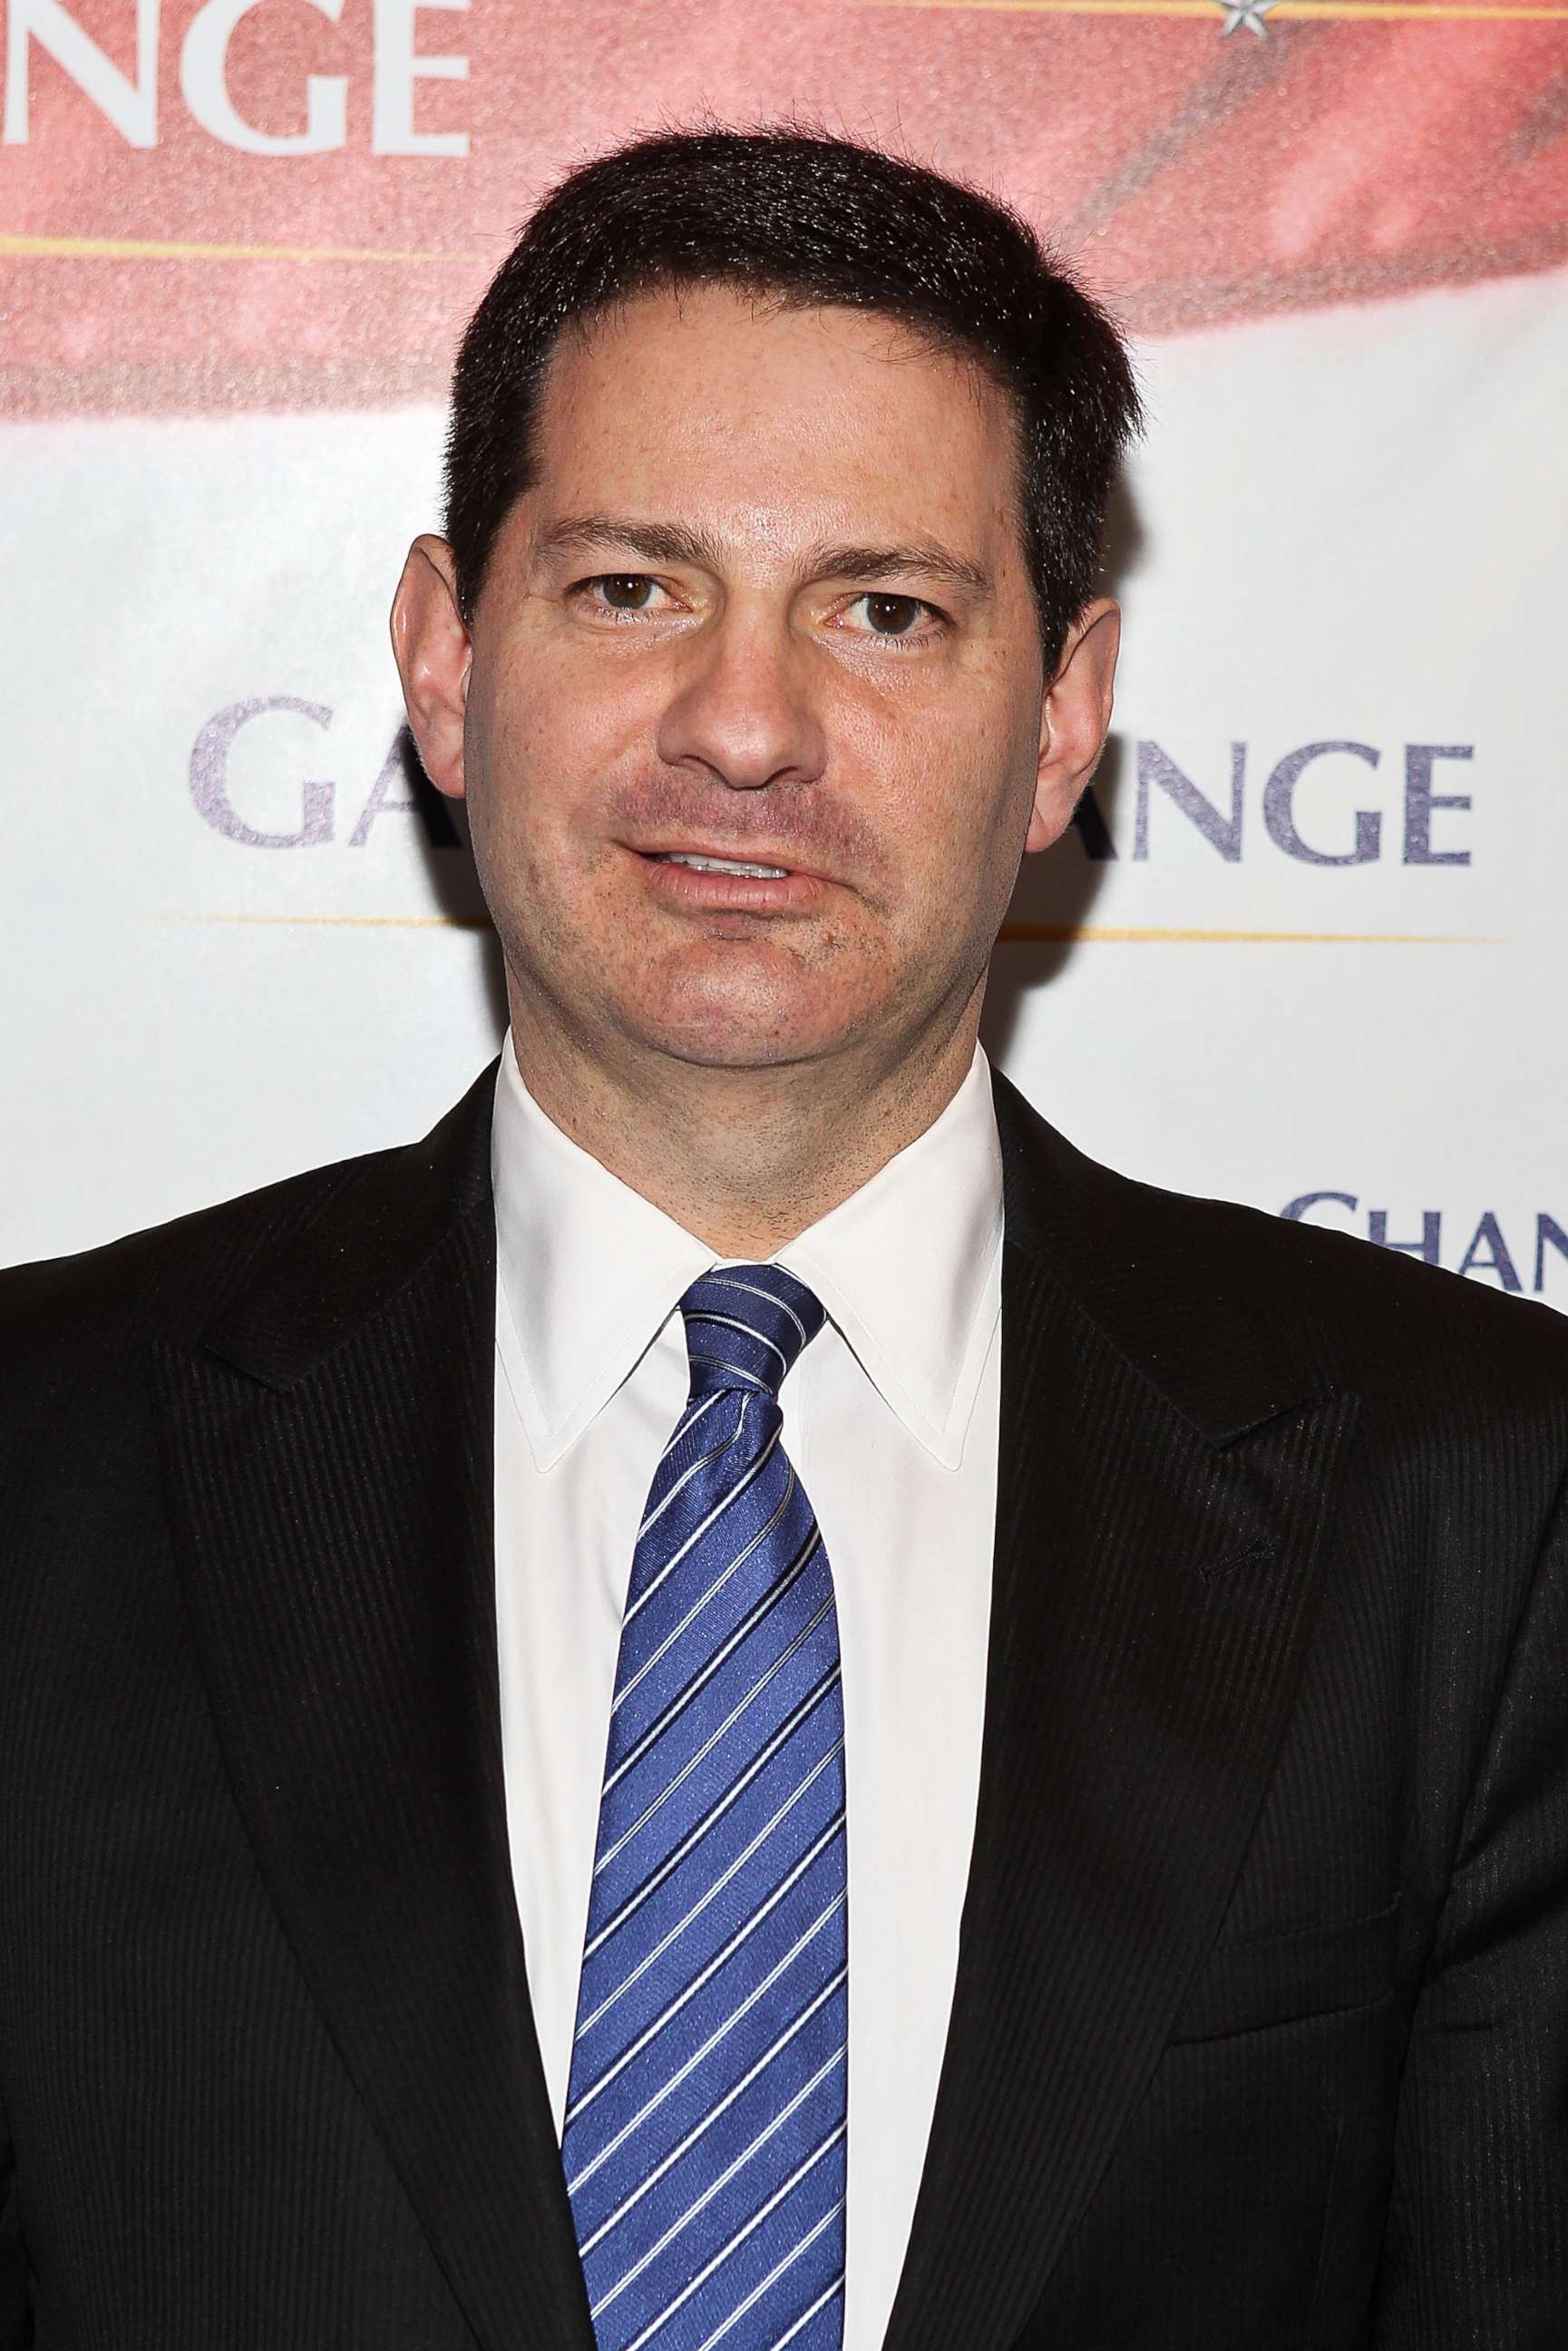 PHOTO: Author Mark Halperin arrives to the "Game Change" premiere at The Newseum on March 8, 2012 in Washington.